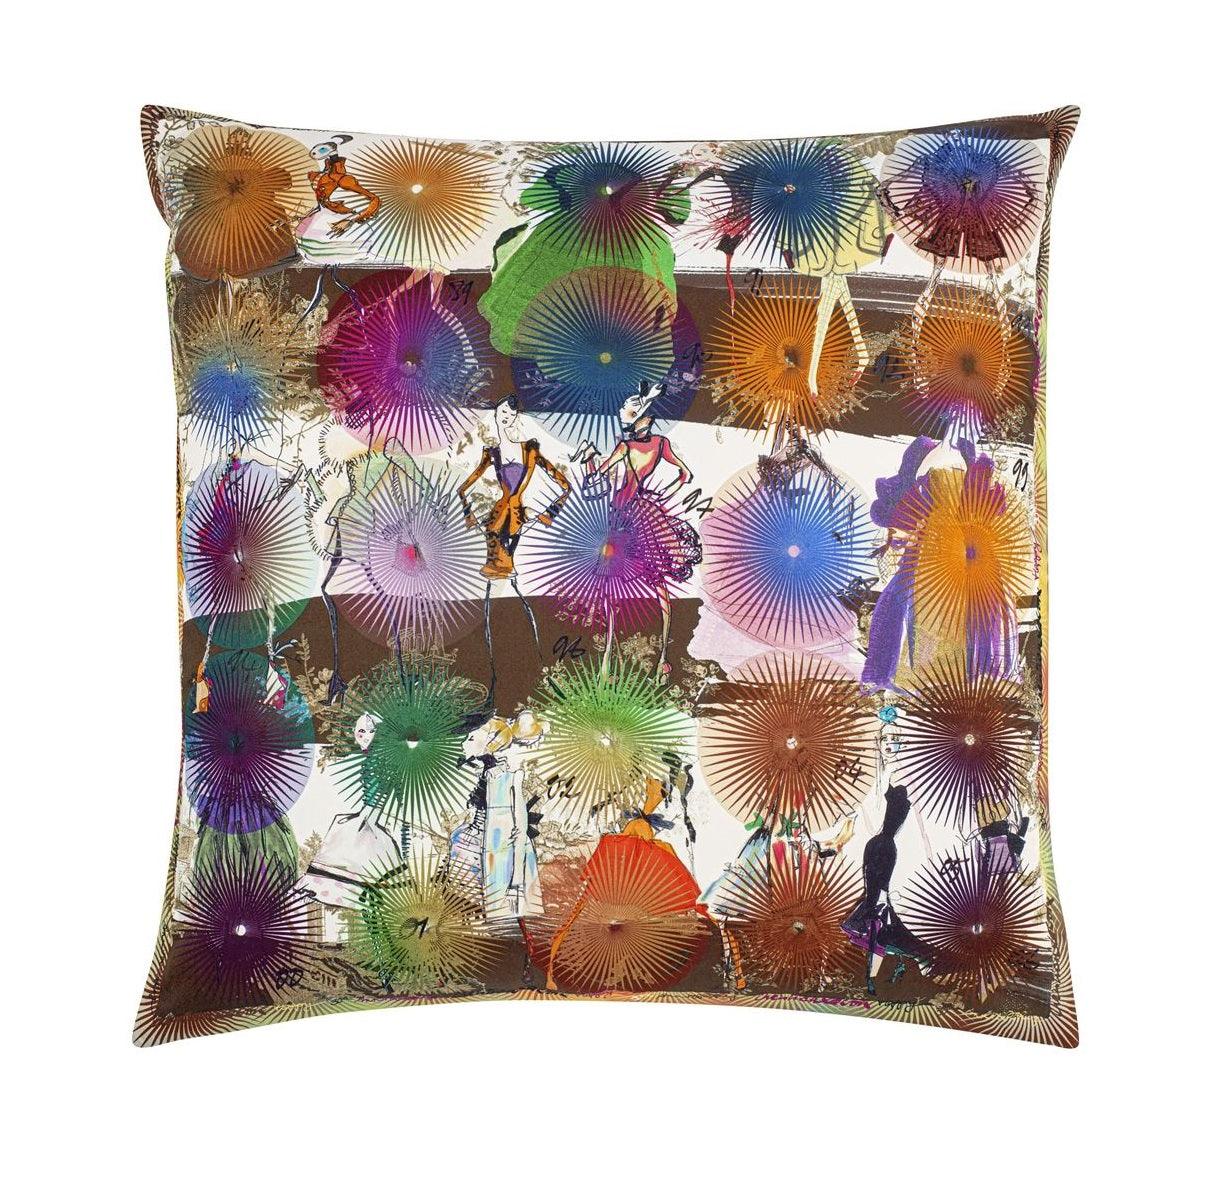 Two-sided pillow LACROIX PHOTOCALL cotton satin - Eye on Design